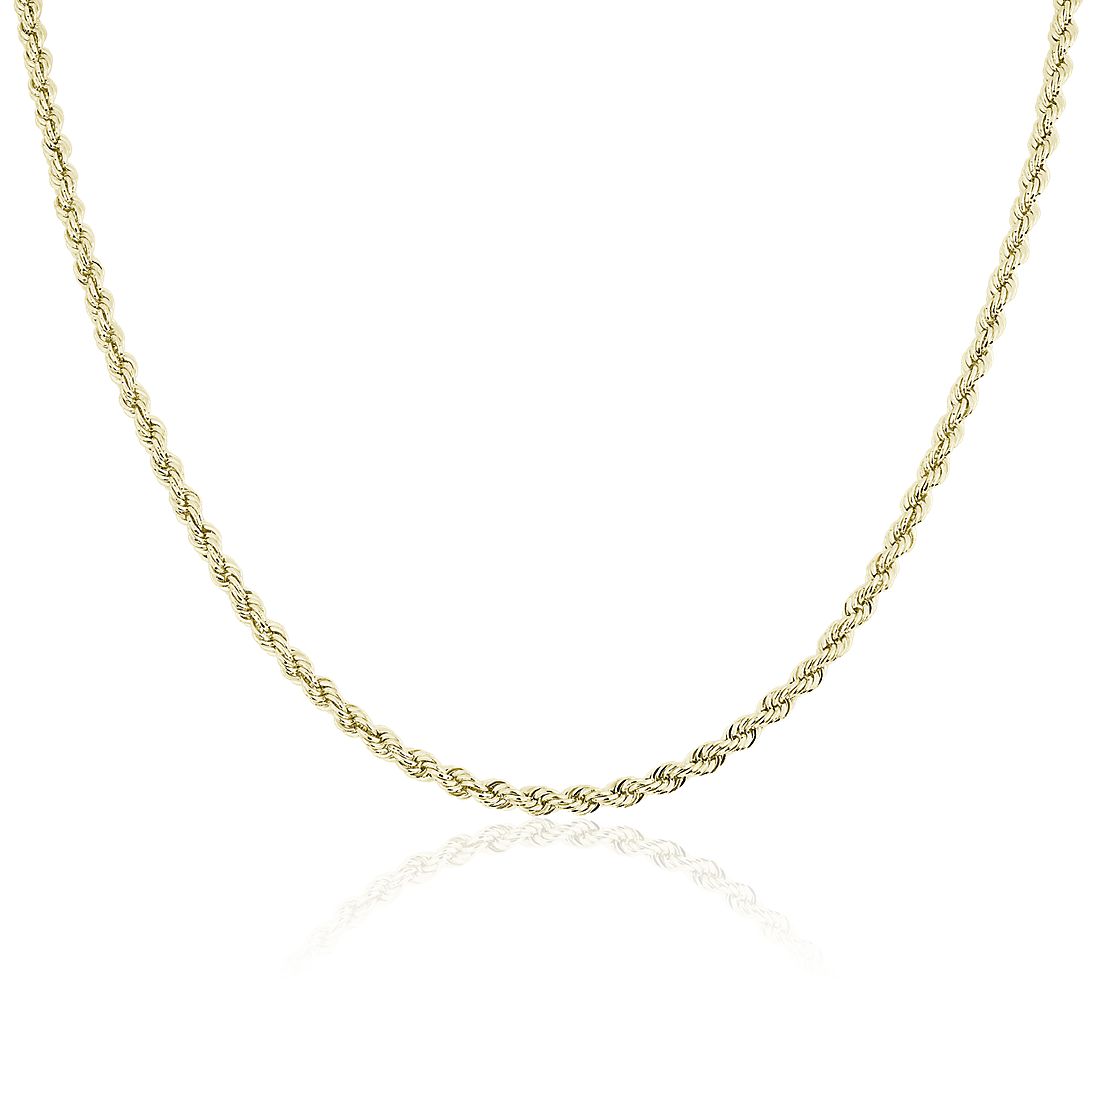 18" Rope Chain in 14k Yellow Gold (3 mm)